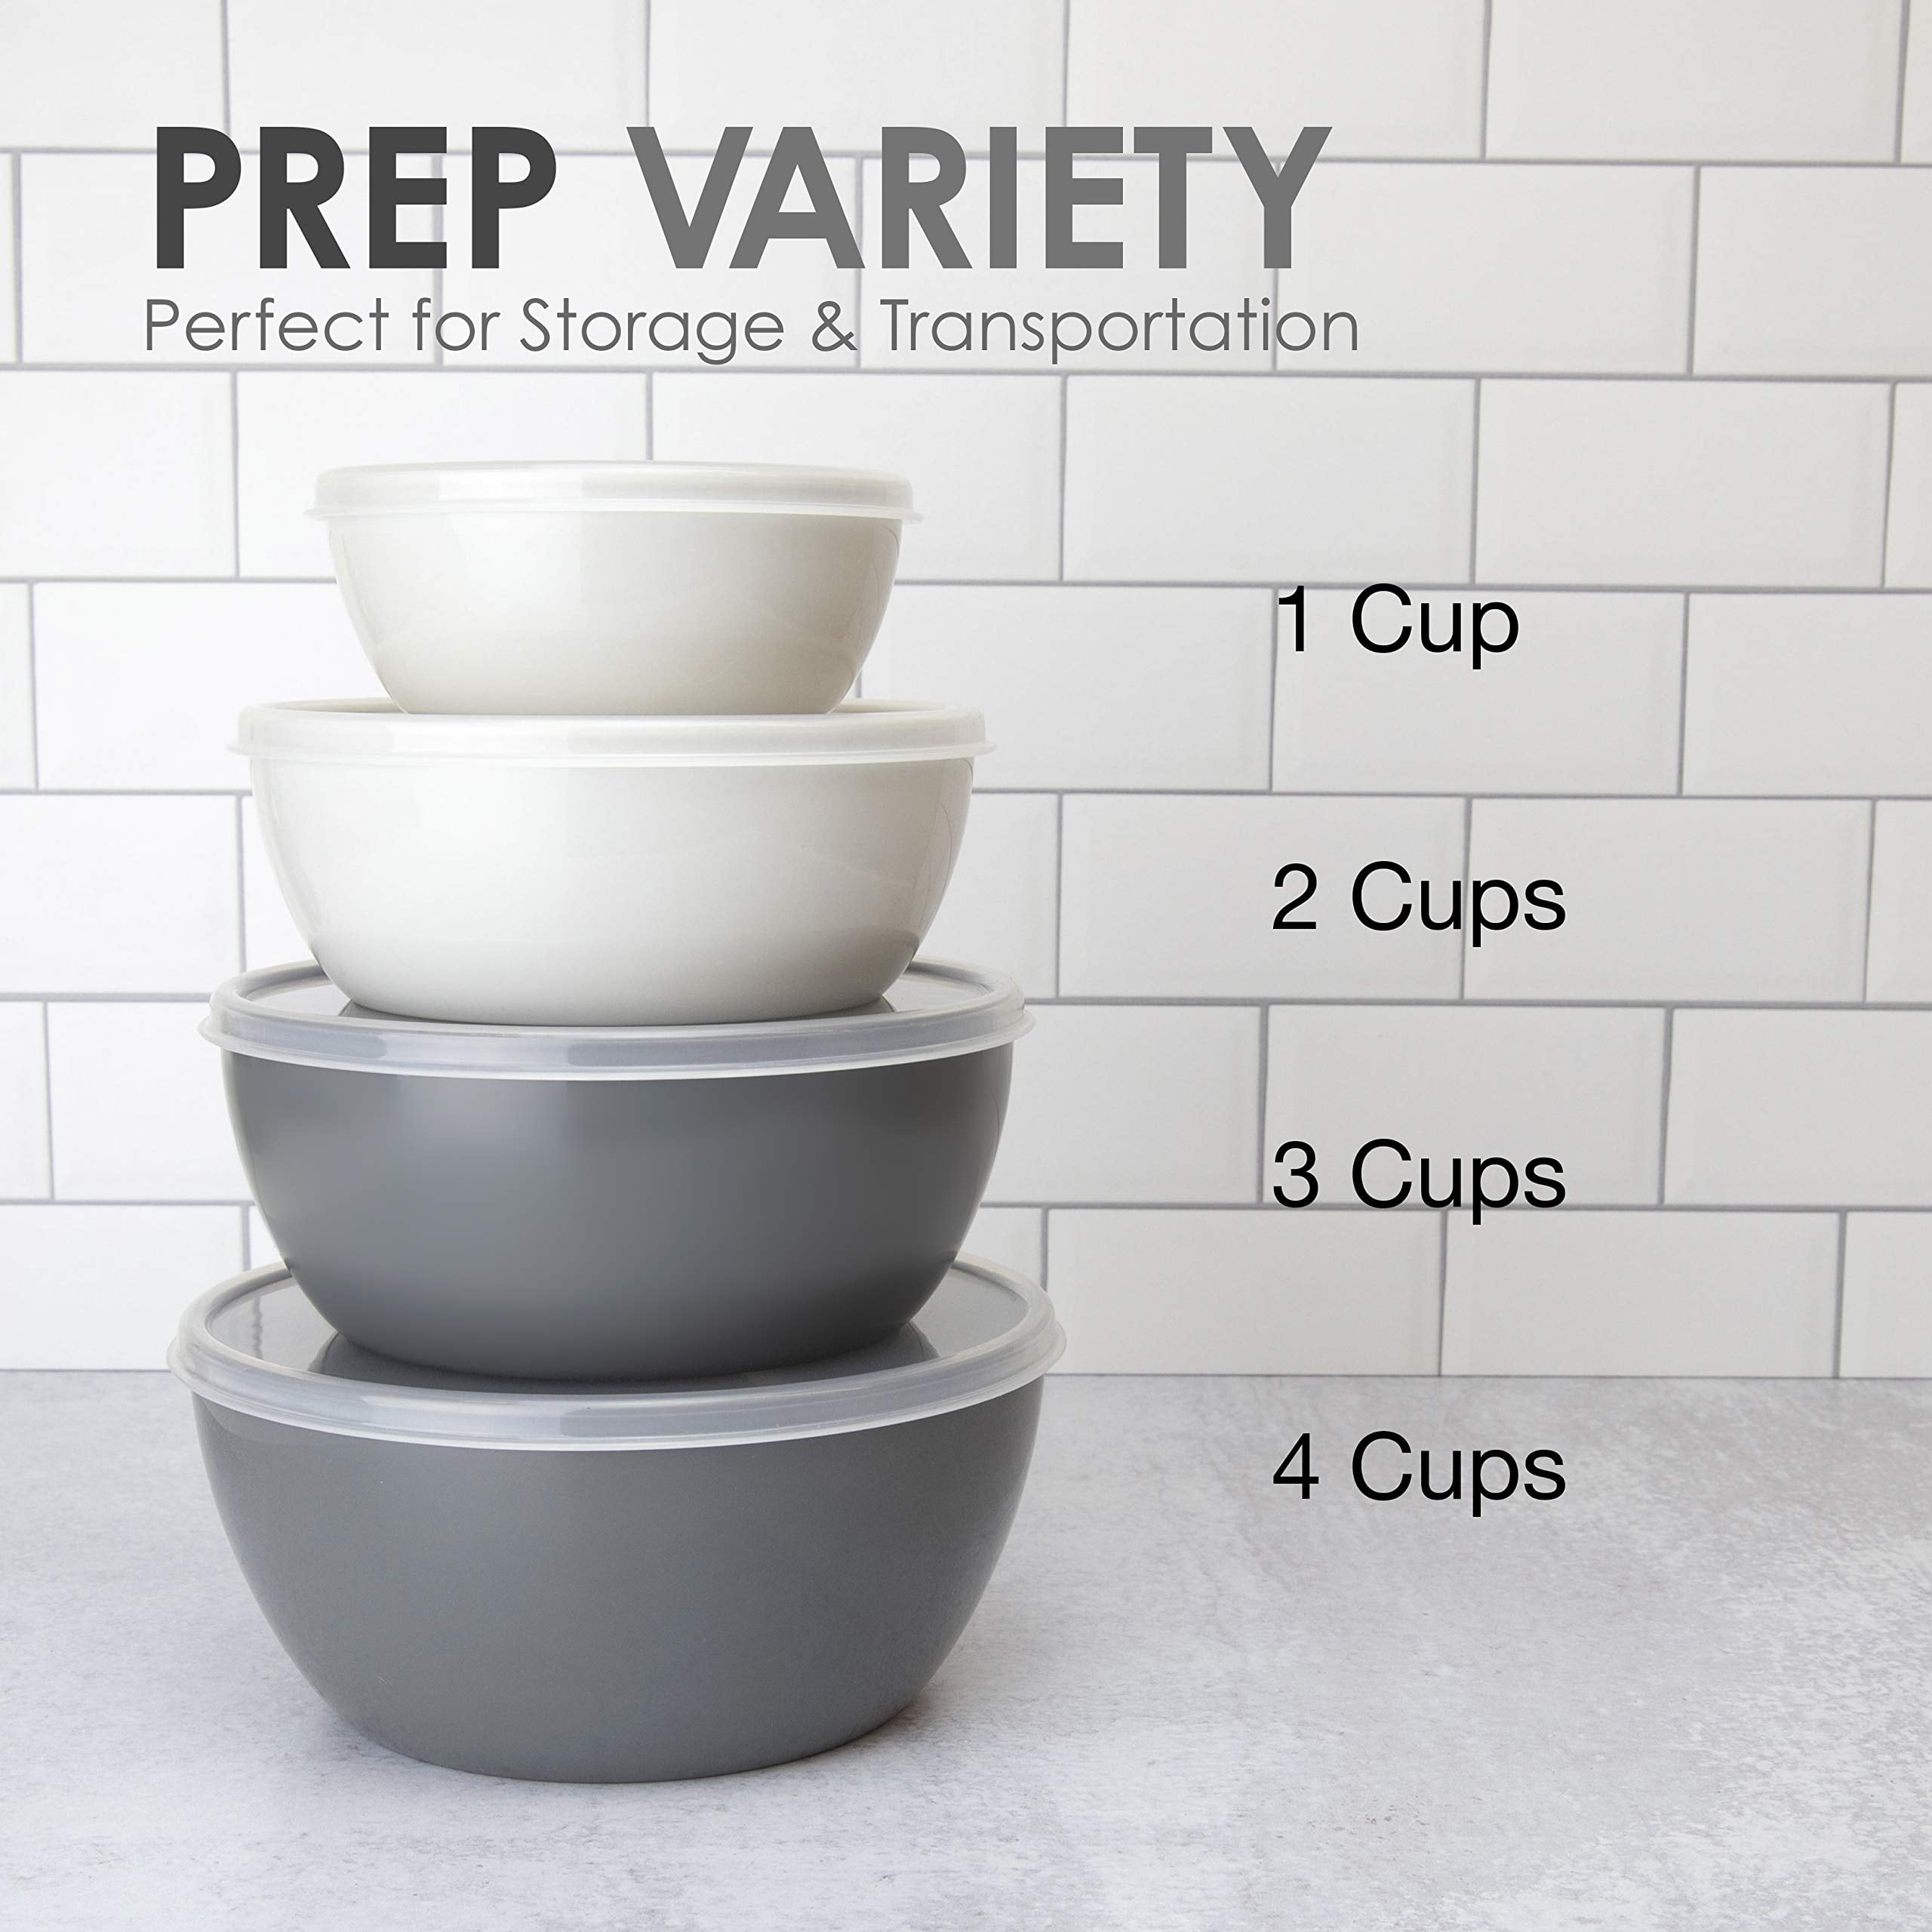 S'well 8 oz. Glass Prep Bowl (Set of 4) 14208-B20-69800 - The Home Depot